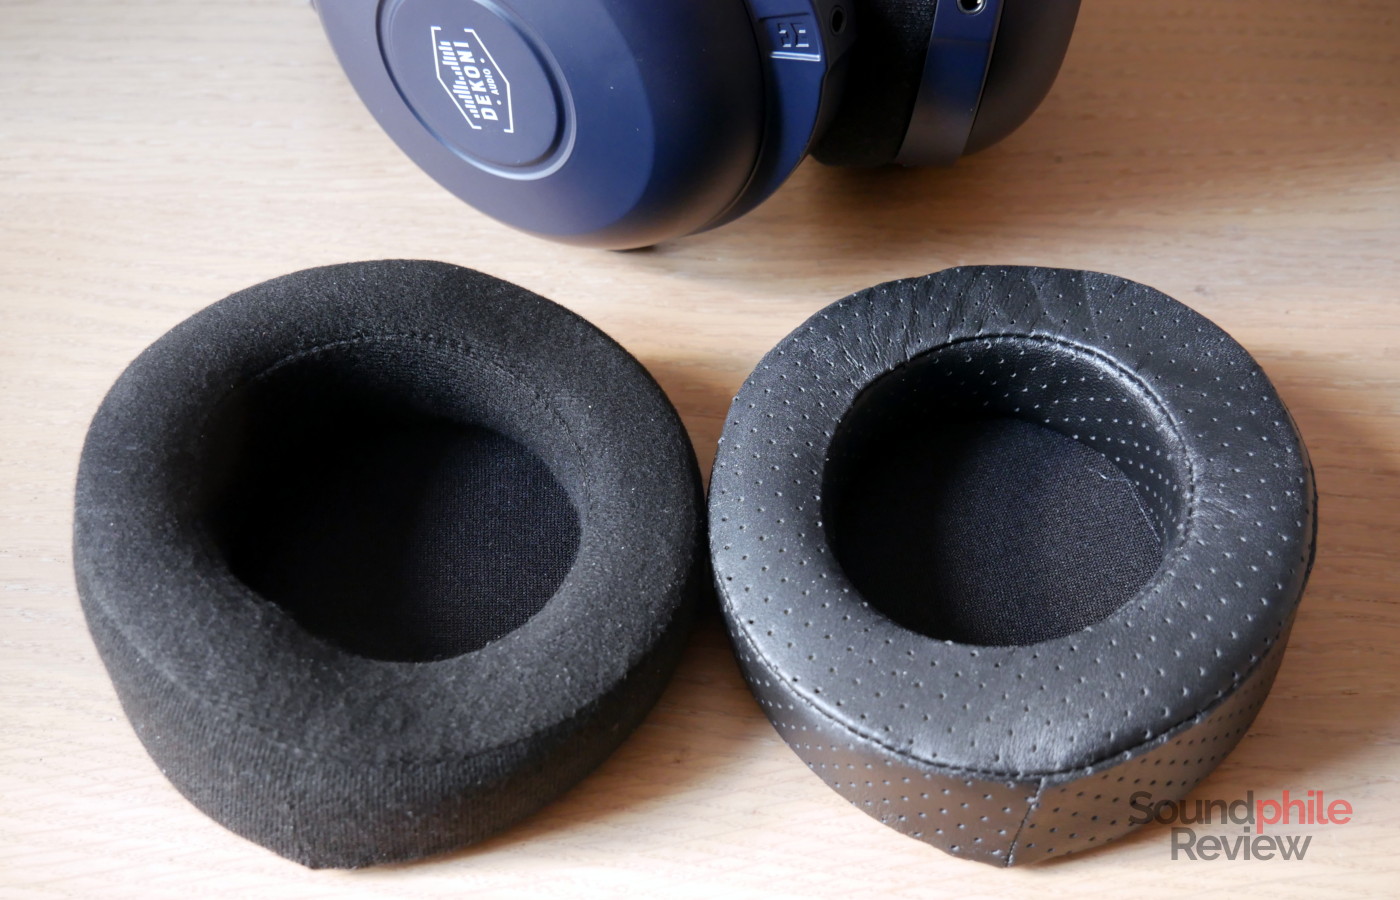 The Dekoni Cobalt come with two types of earpads: velour and fenestrated sheepskin